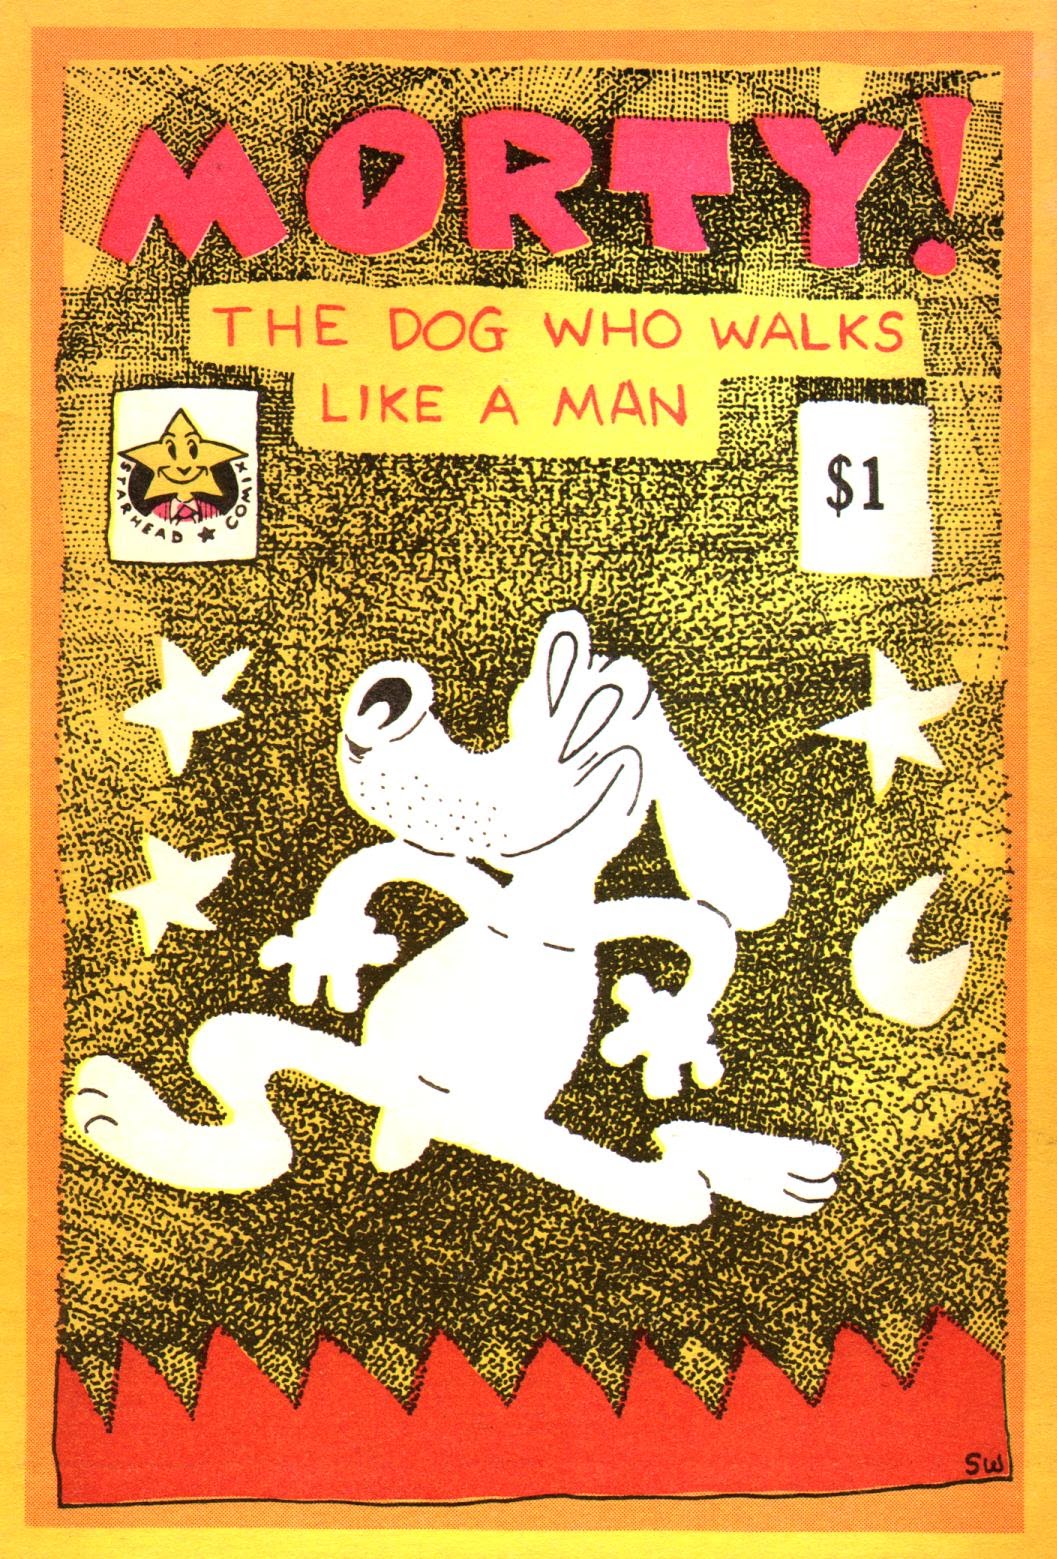 Read online Morty: The Dog Who Walks Like a Man comic -  Issue # Full - 1